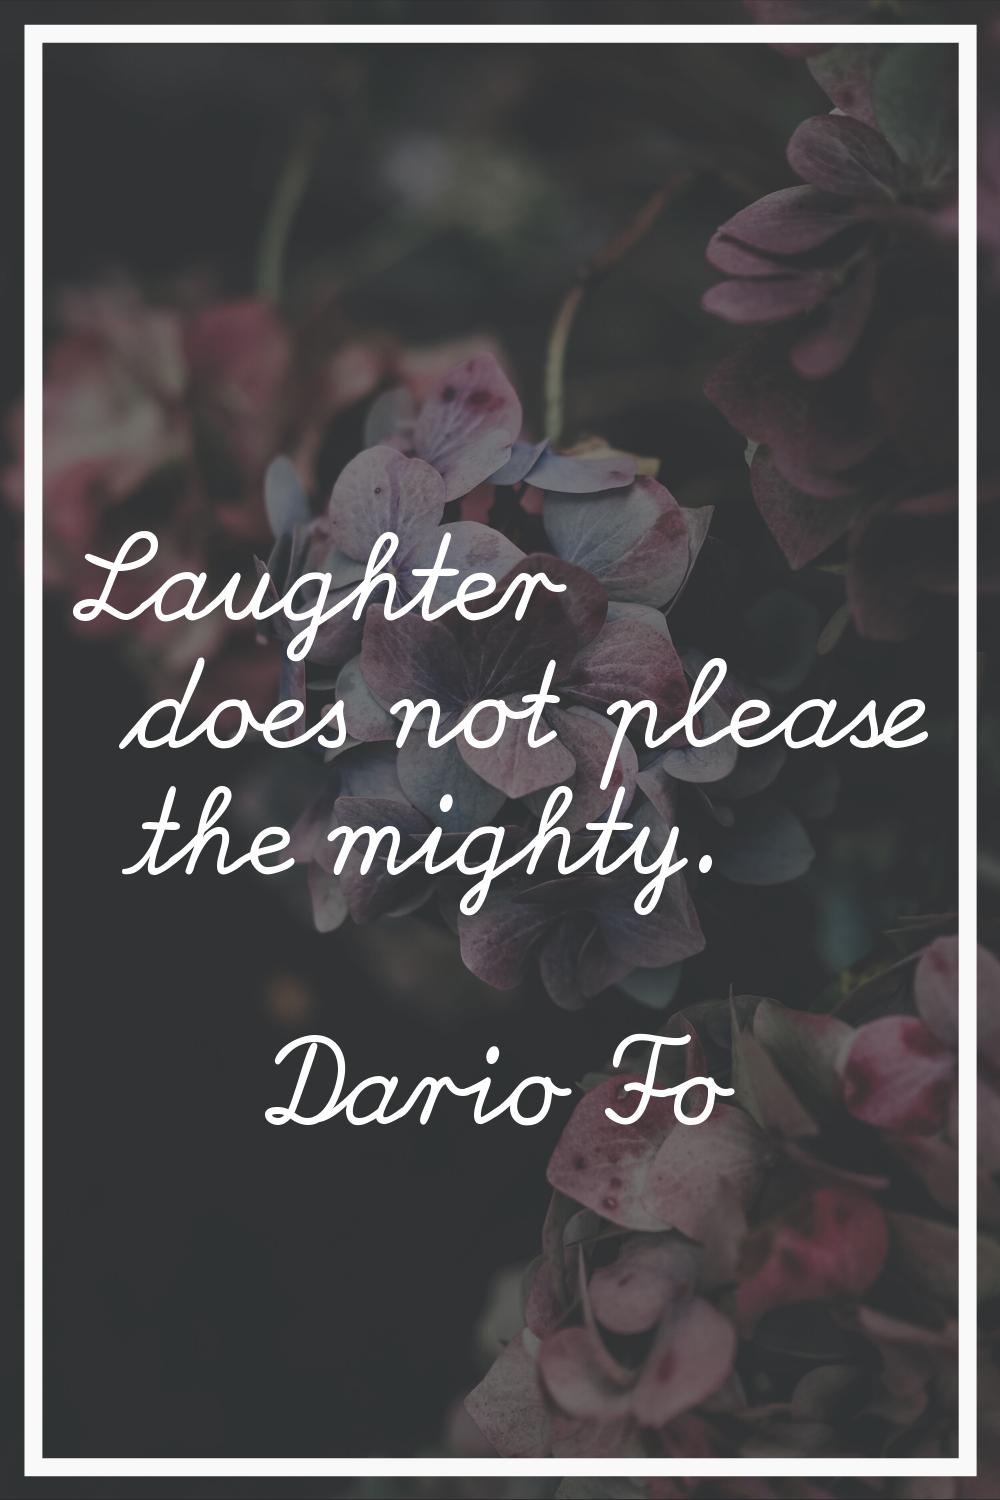 Laughter does not please the mighty.